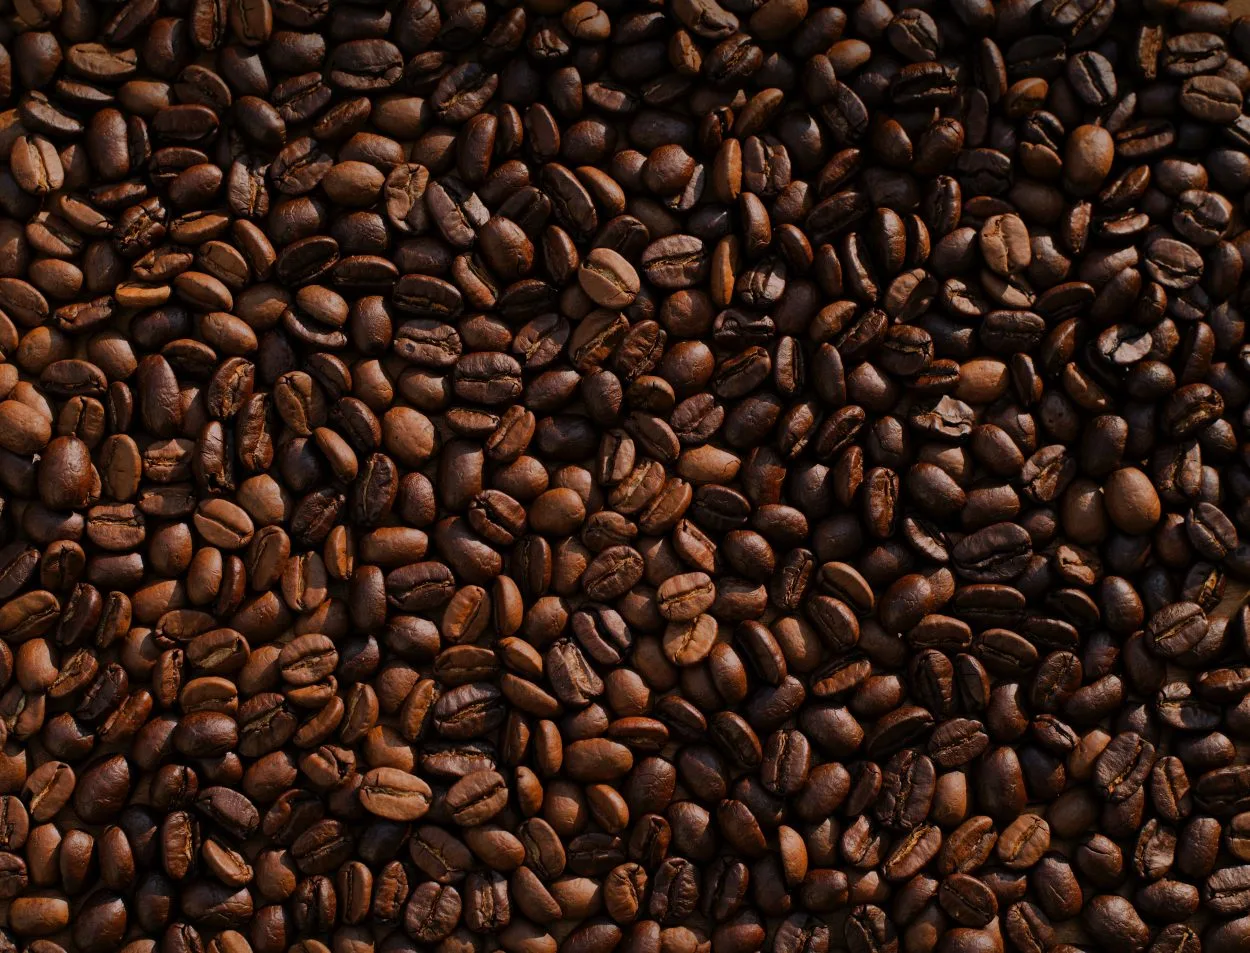 Different roasts of coffee beans mixed together.